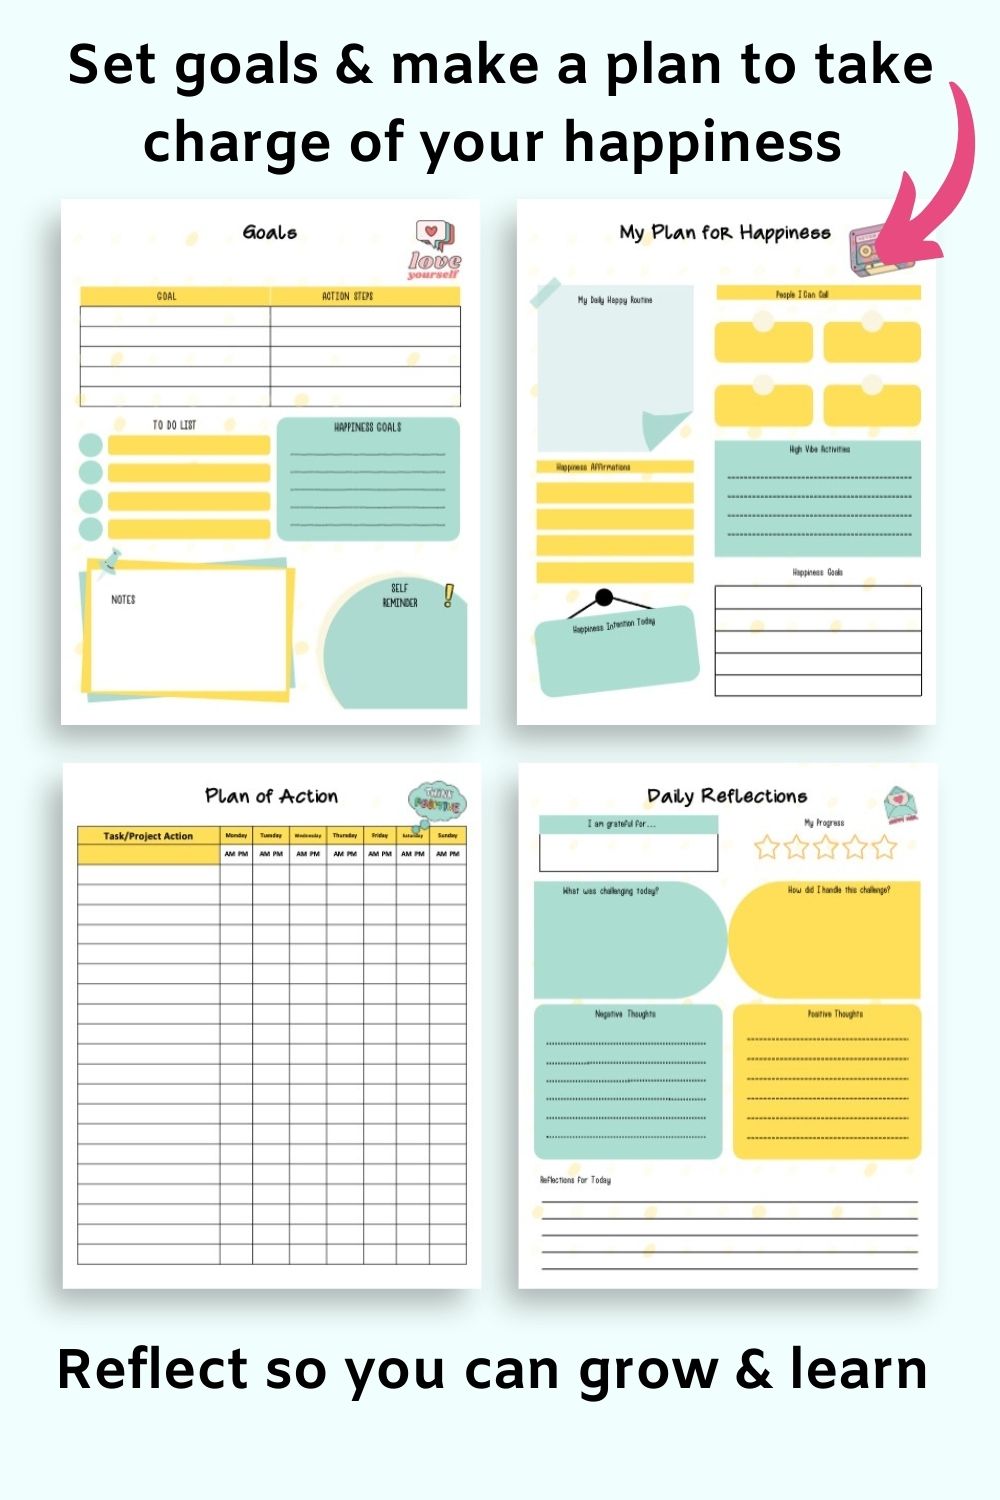 Text "set goals & make a plan to take charge of your happiness" and "reflect so you can grow and learn" with four journal pages: goals, my plan for happiness, plan of action, and daily reflections